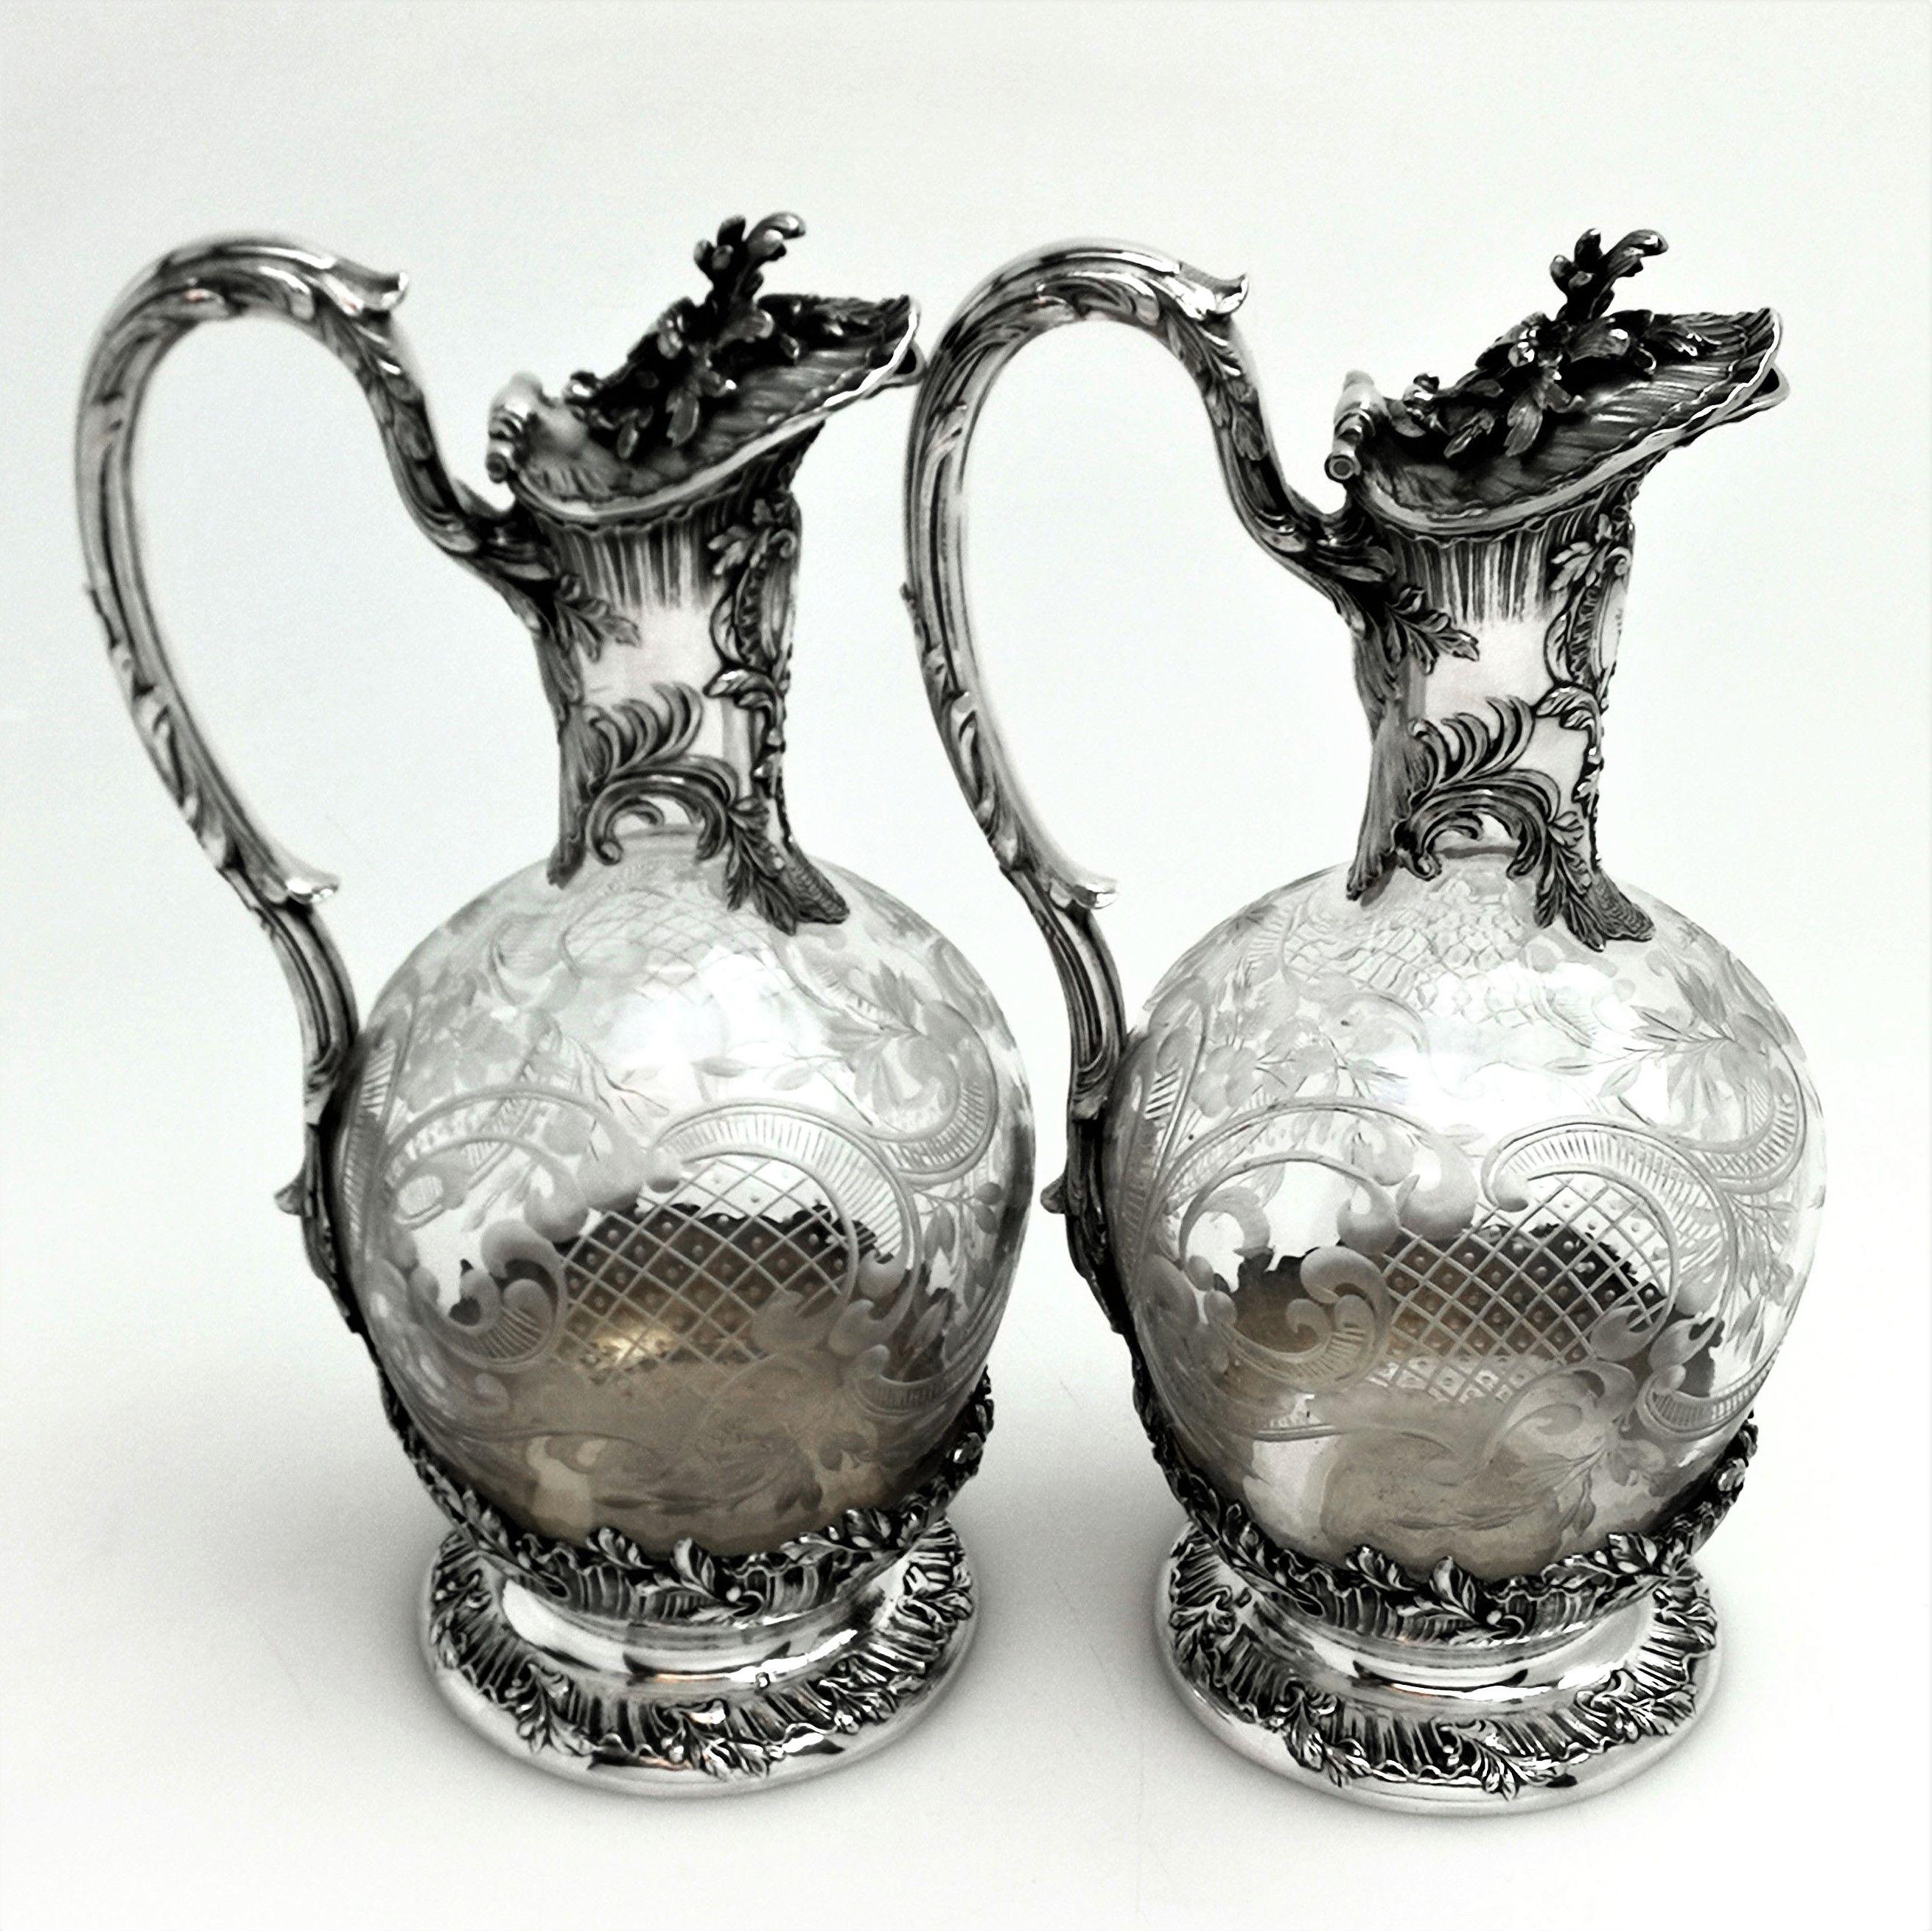 A beautiful pair of antique French solid silver and glass claret jugs. These wine jugs feature ornate chased patterning including a shaped cartouche with an engraved monogram below the spout. The Jugs each have a foliate topped handles that reach